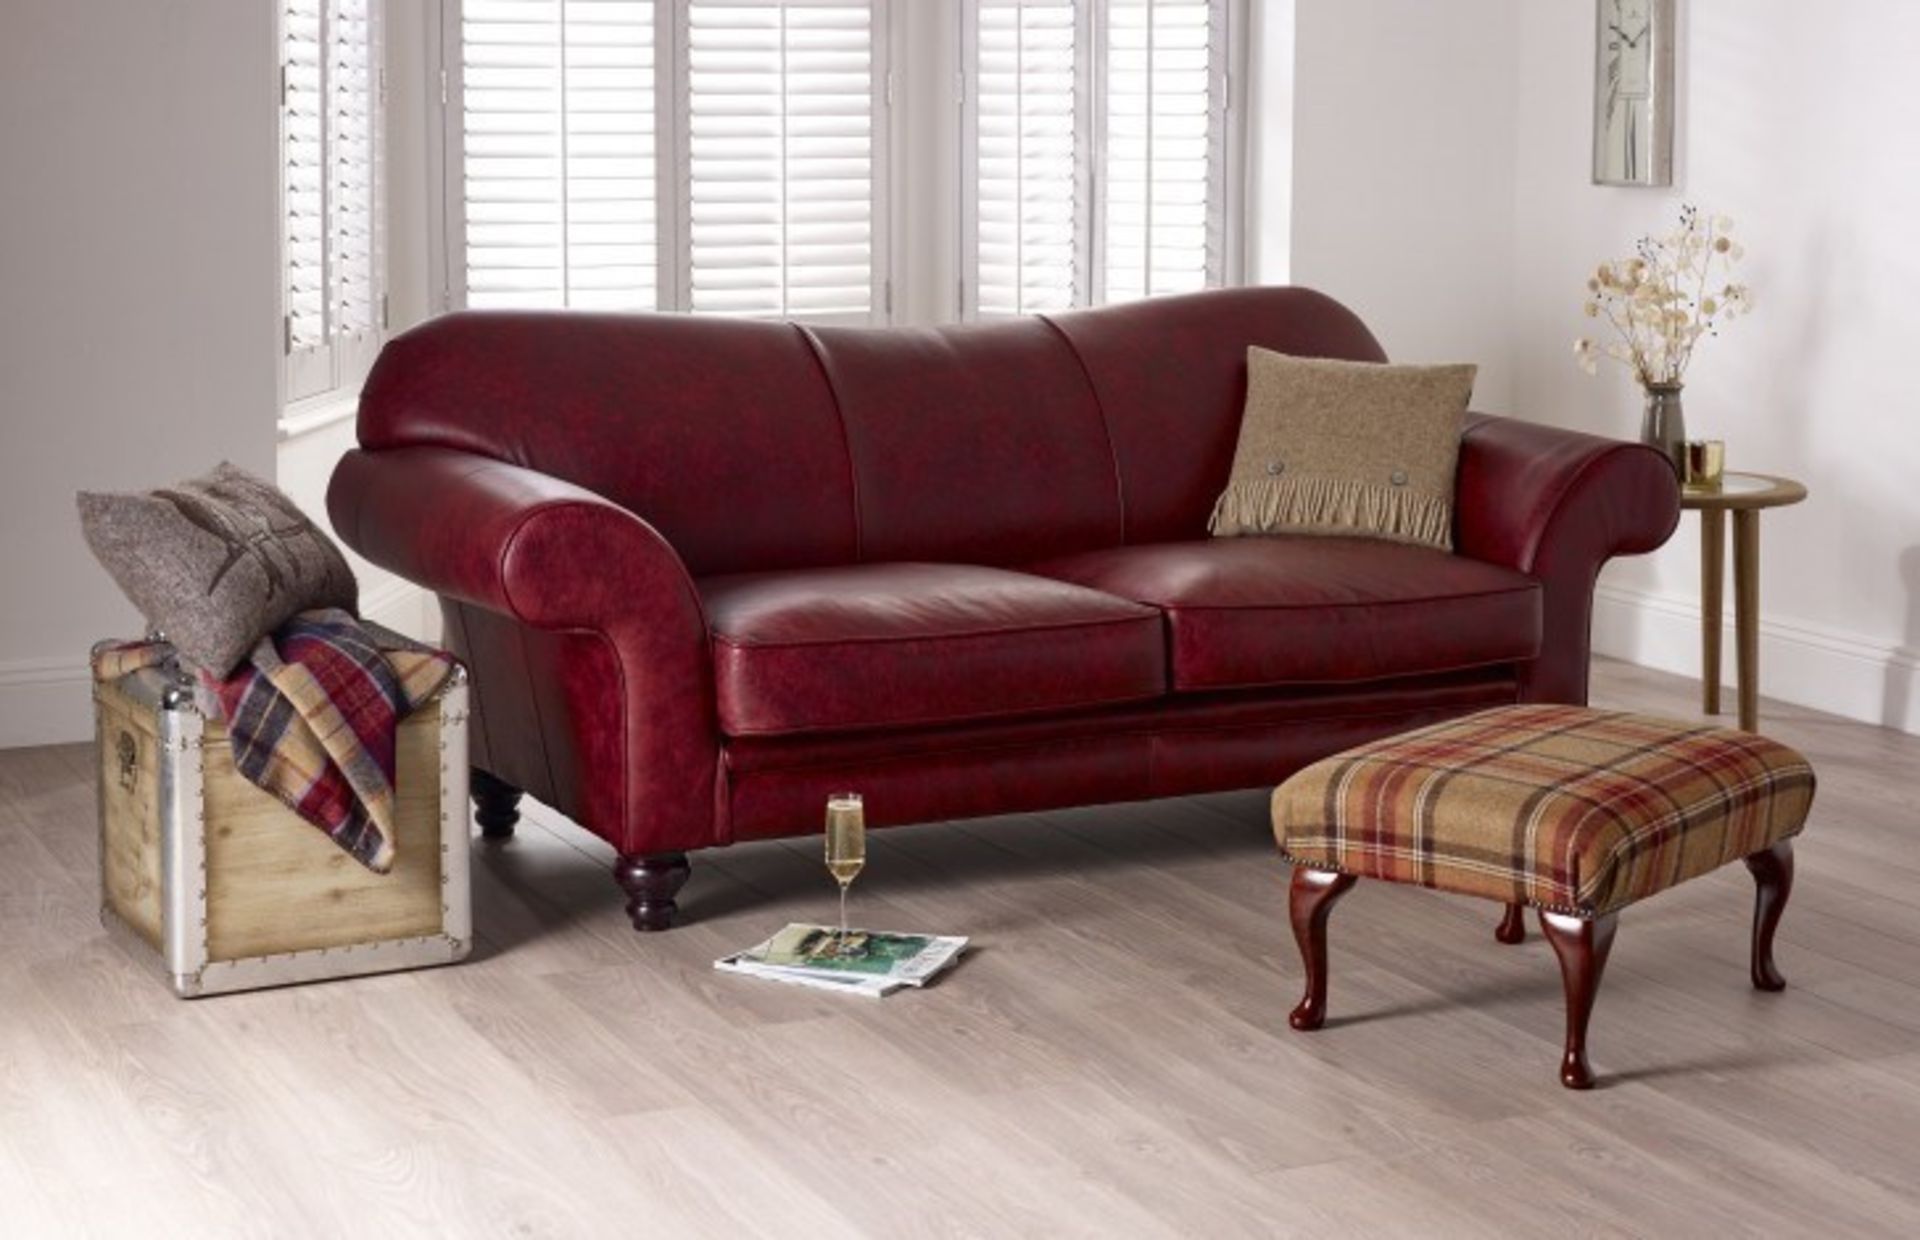 Eton 4 Seater Tobacco Leather Curved Sofa A Beautiful Narrower Depth Sofa A Contemporary Twist On